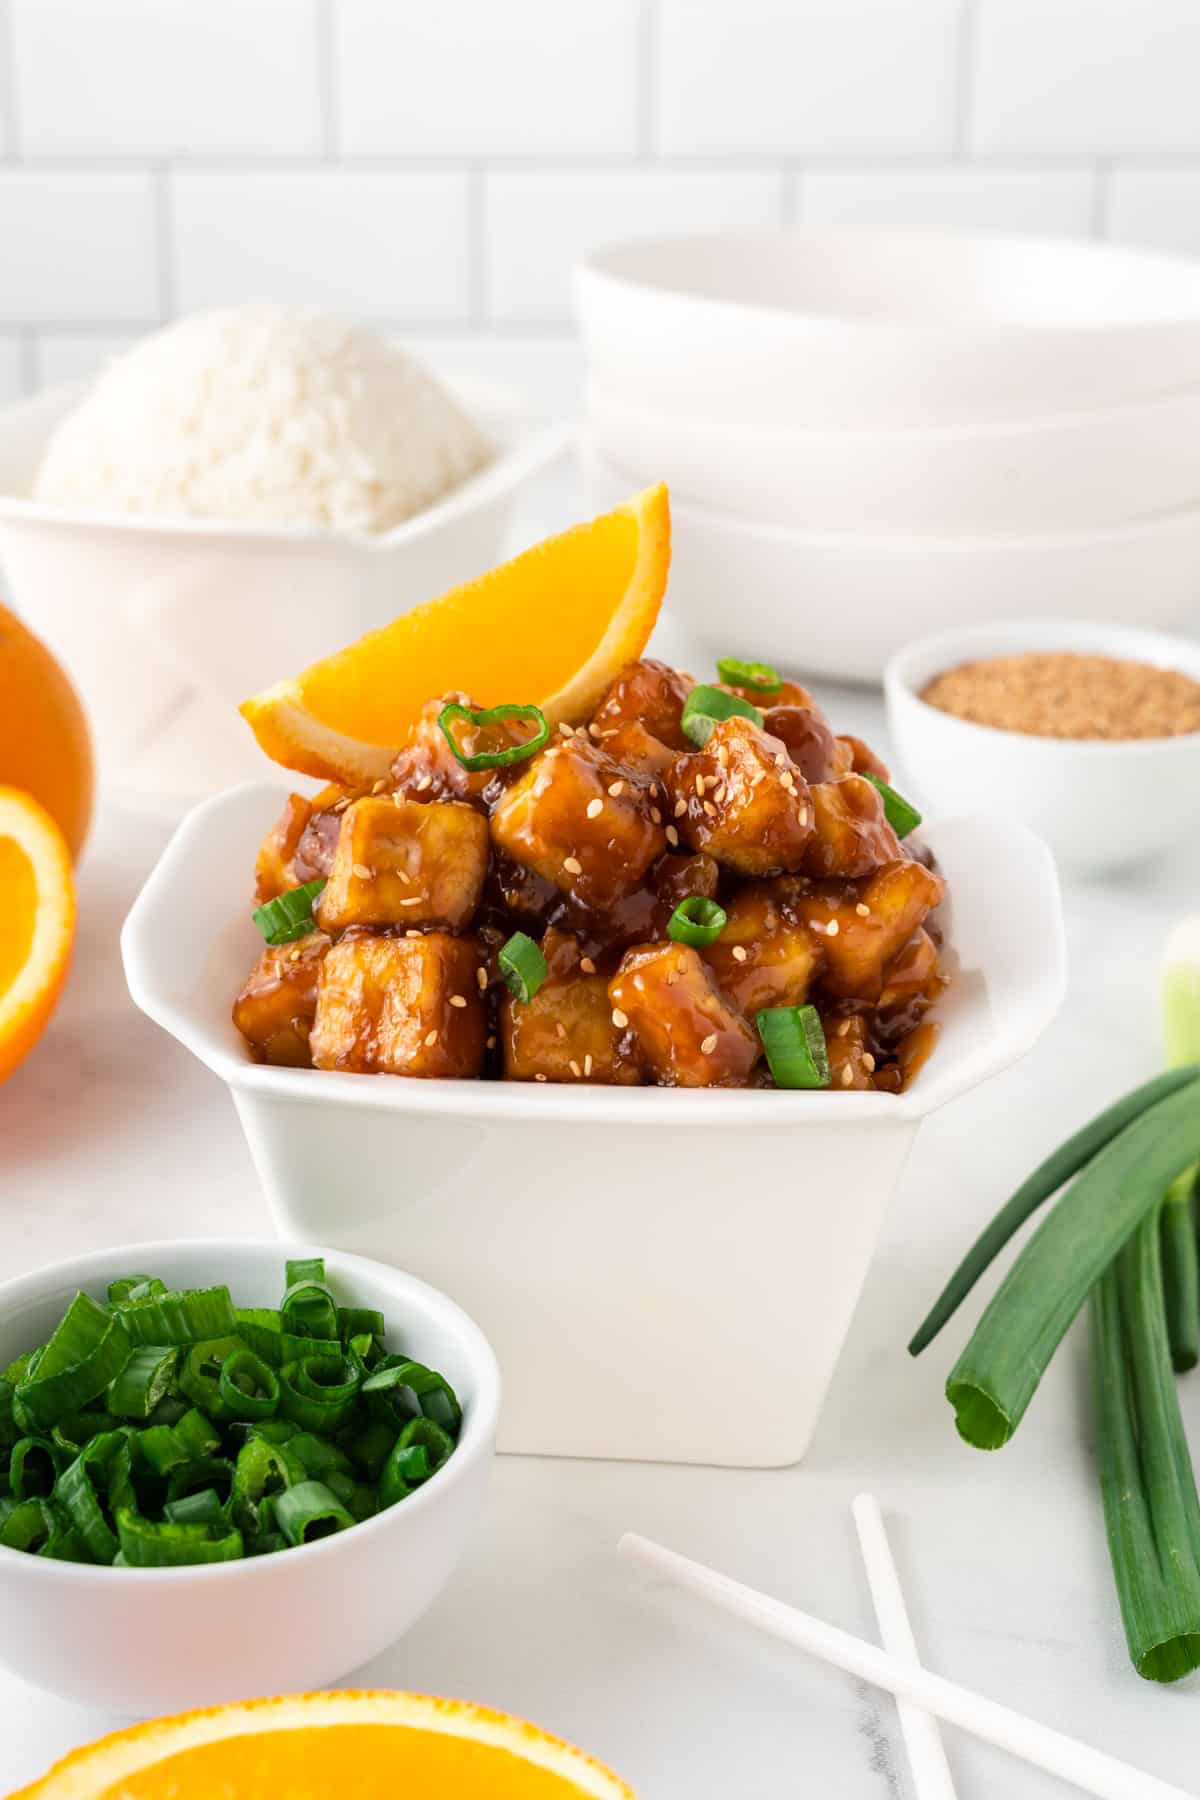 orange tofu in a takeout container